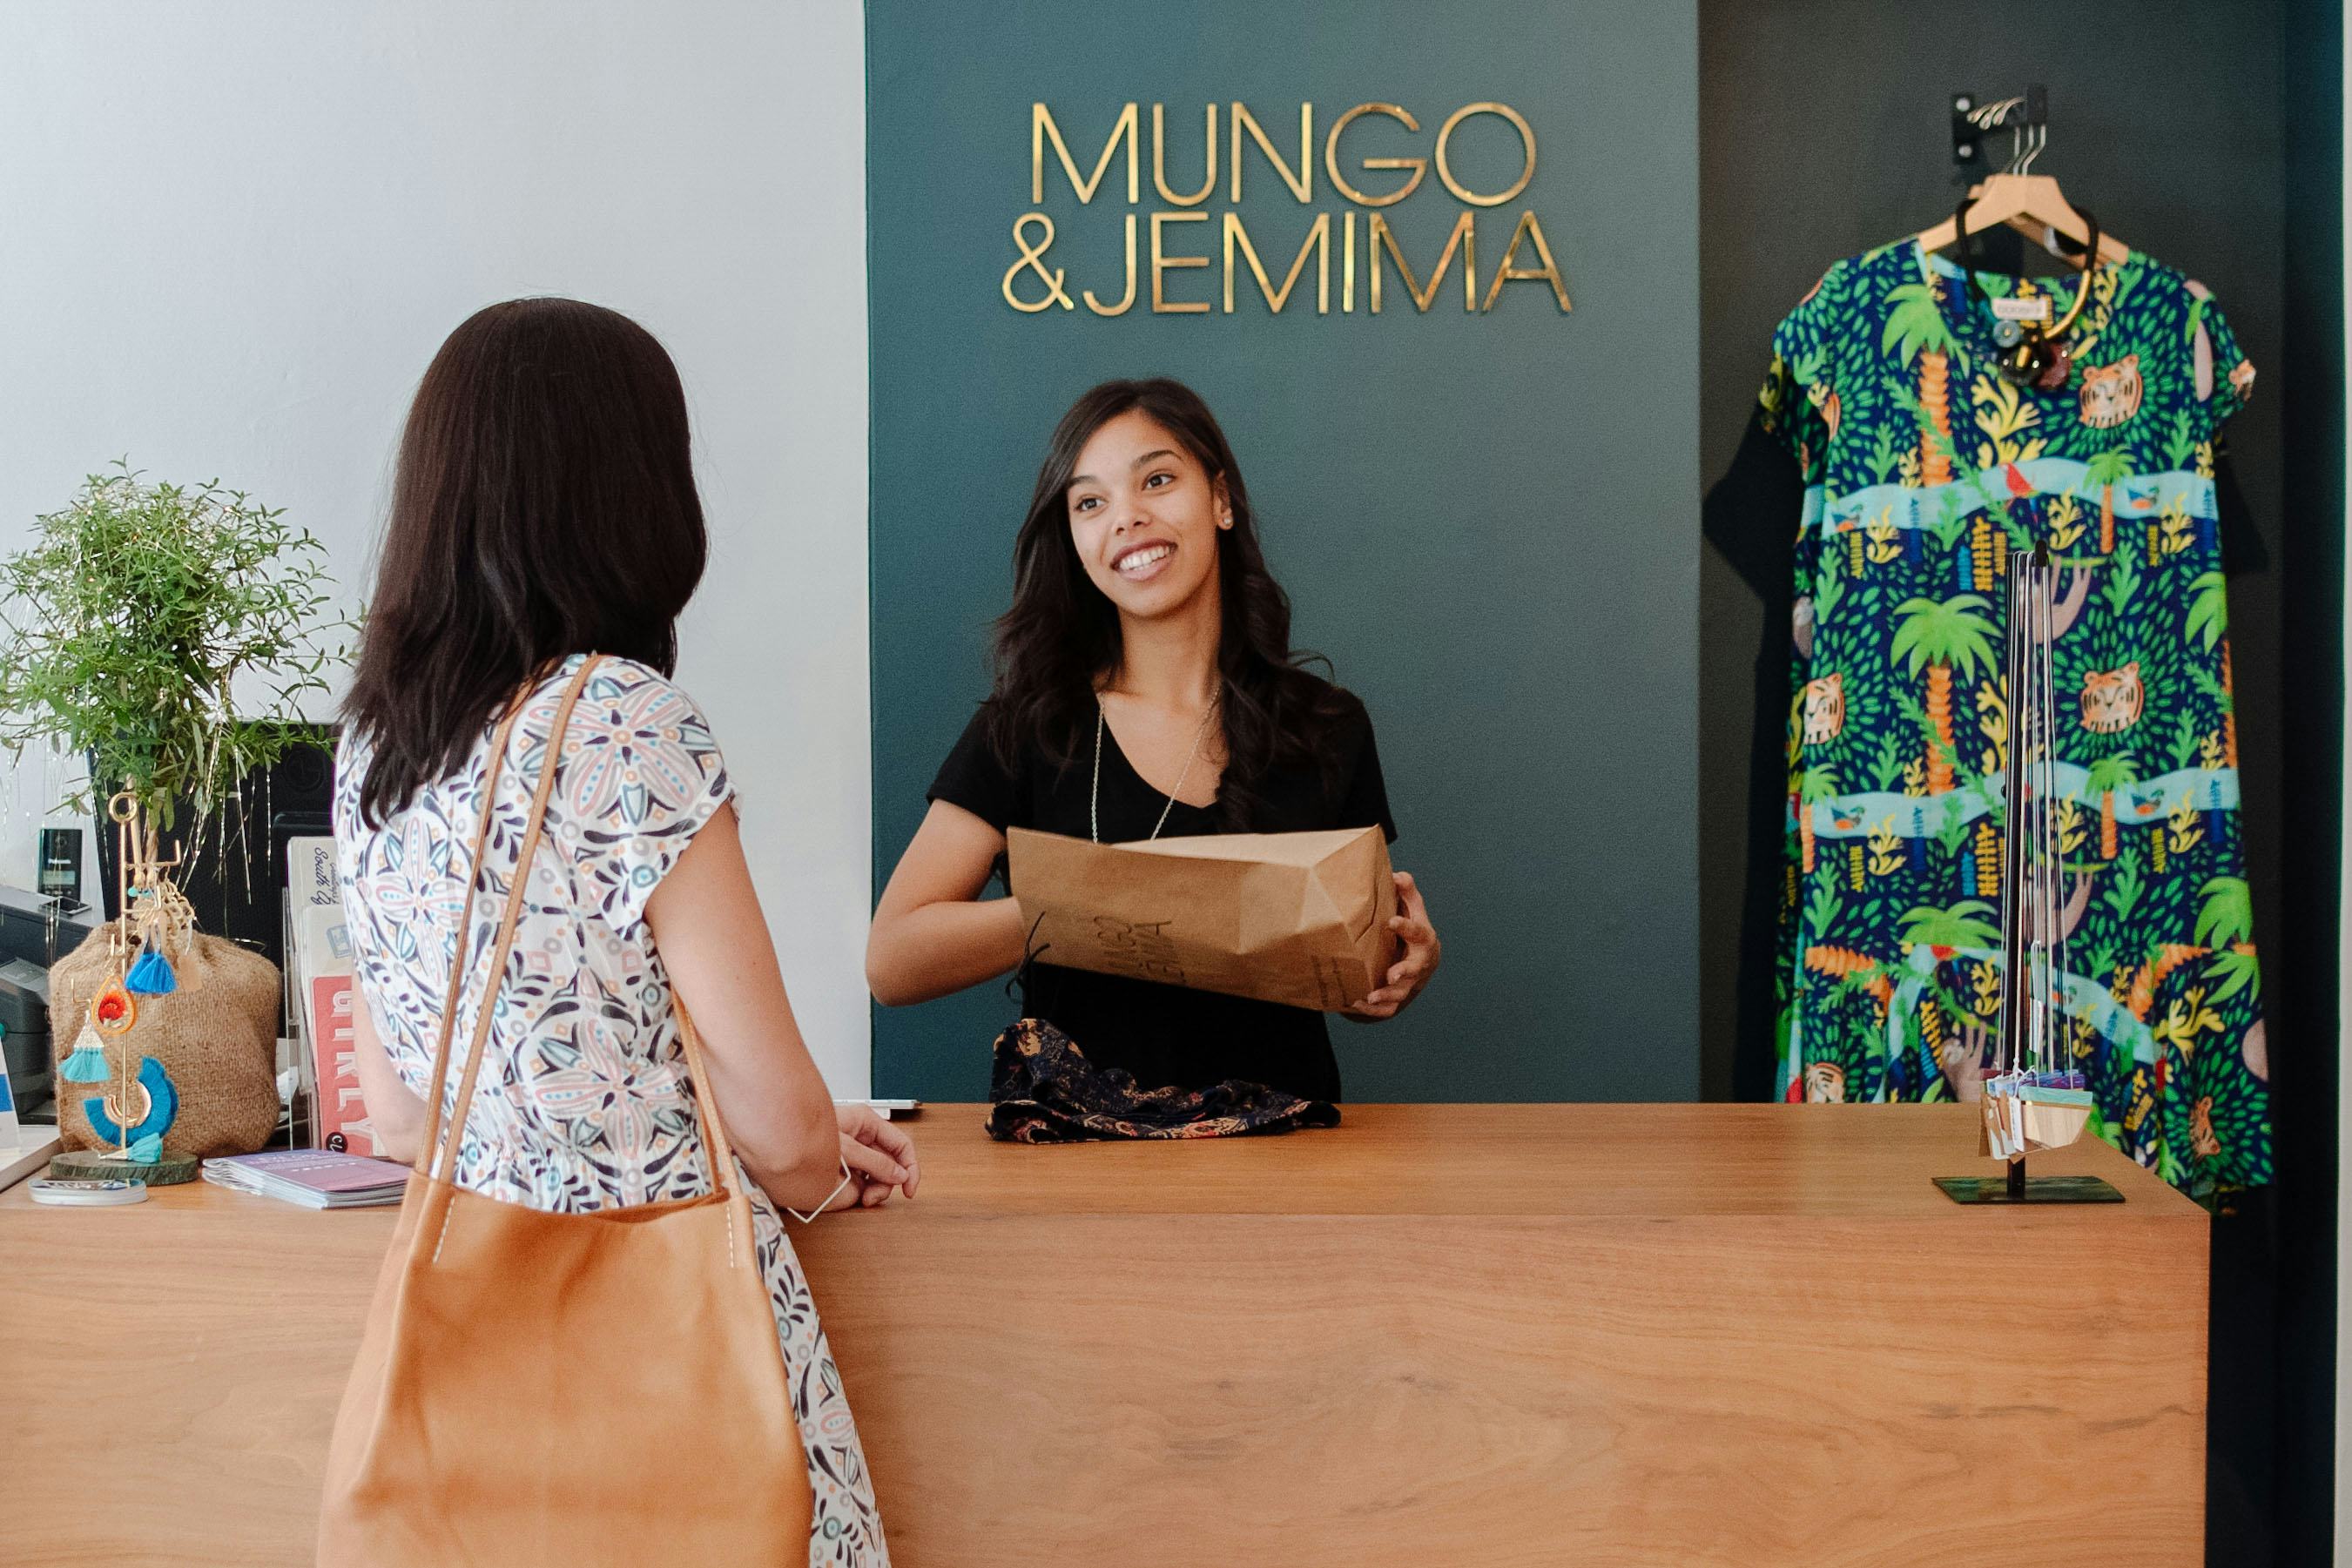 Mungo & Jemima - Shopping in Cape Town